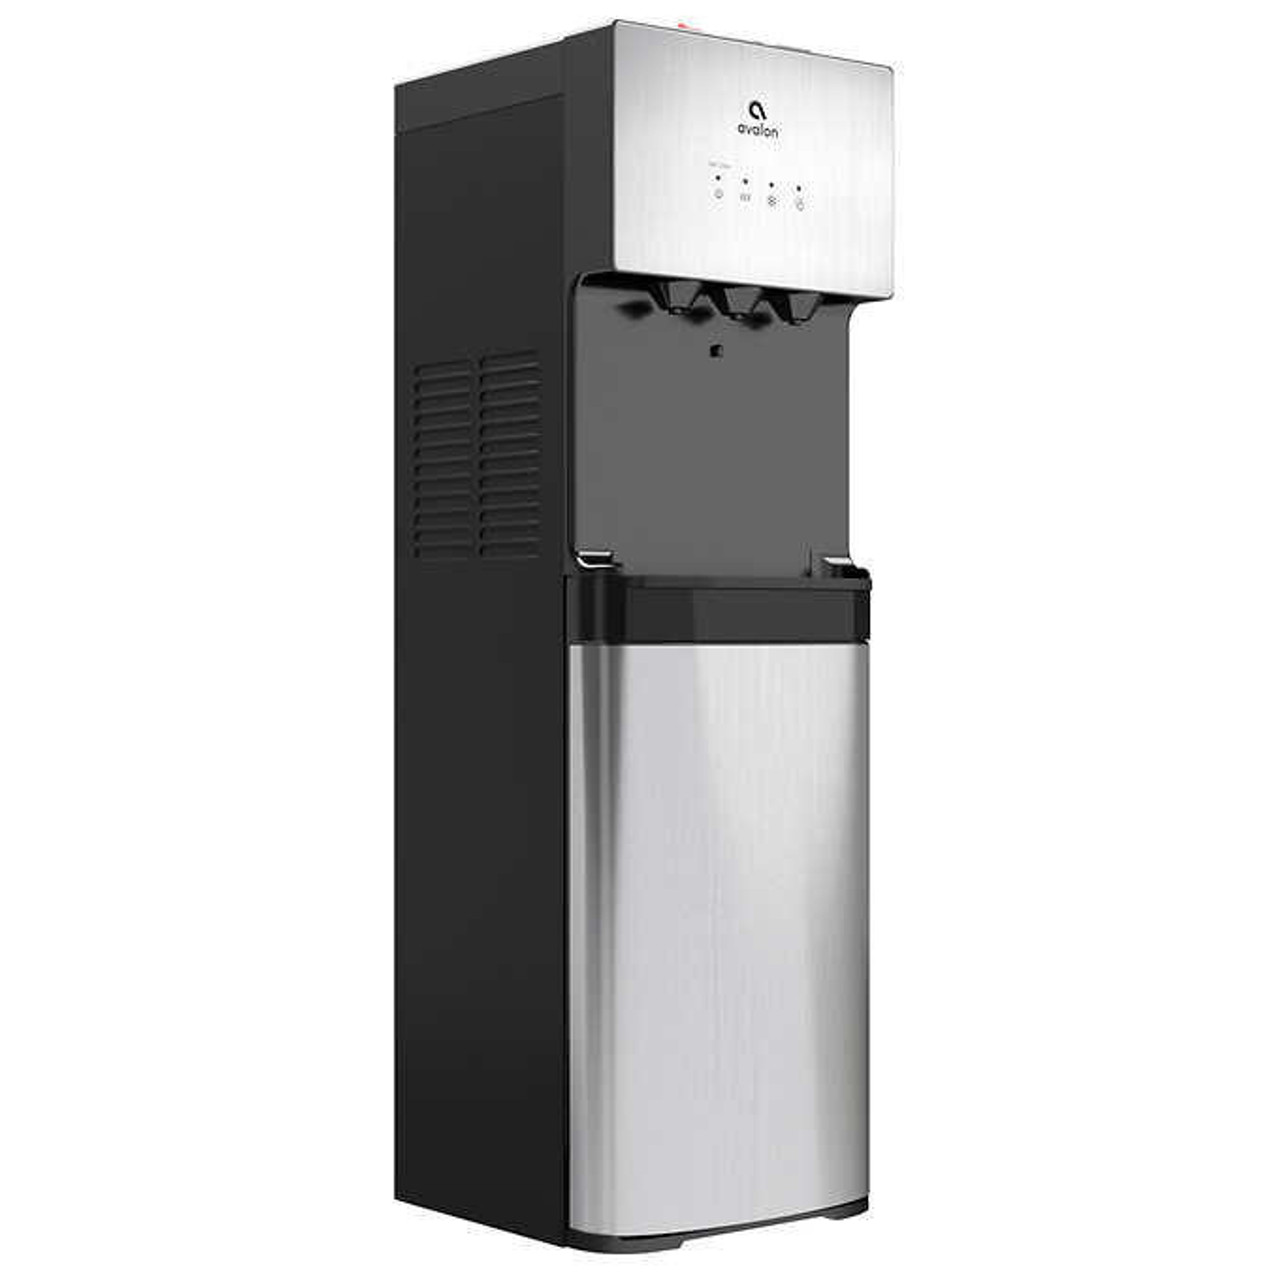  Avalon Bottom Loading Limited Edition Self-Cleaning Water Cooler 